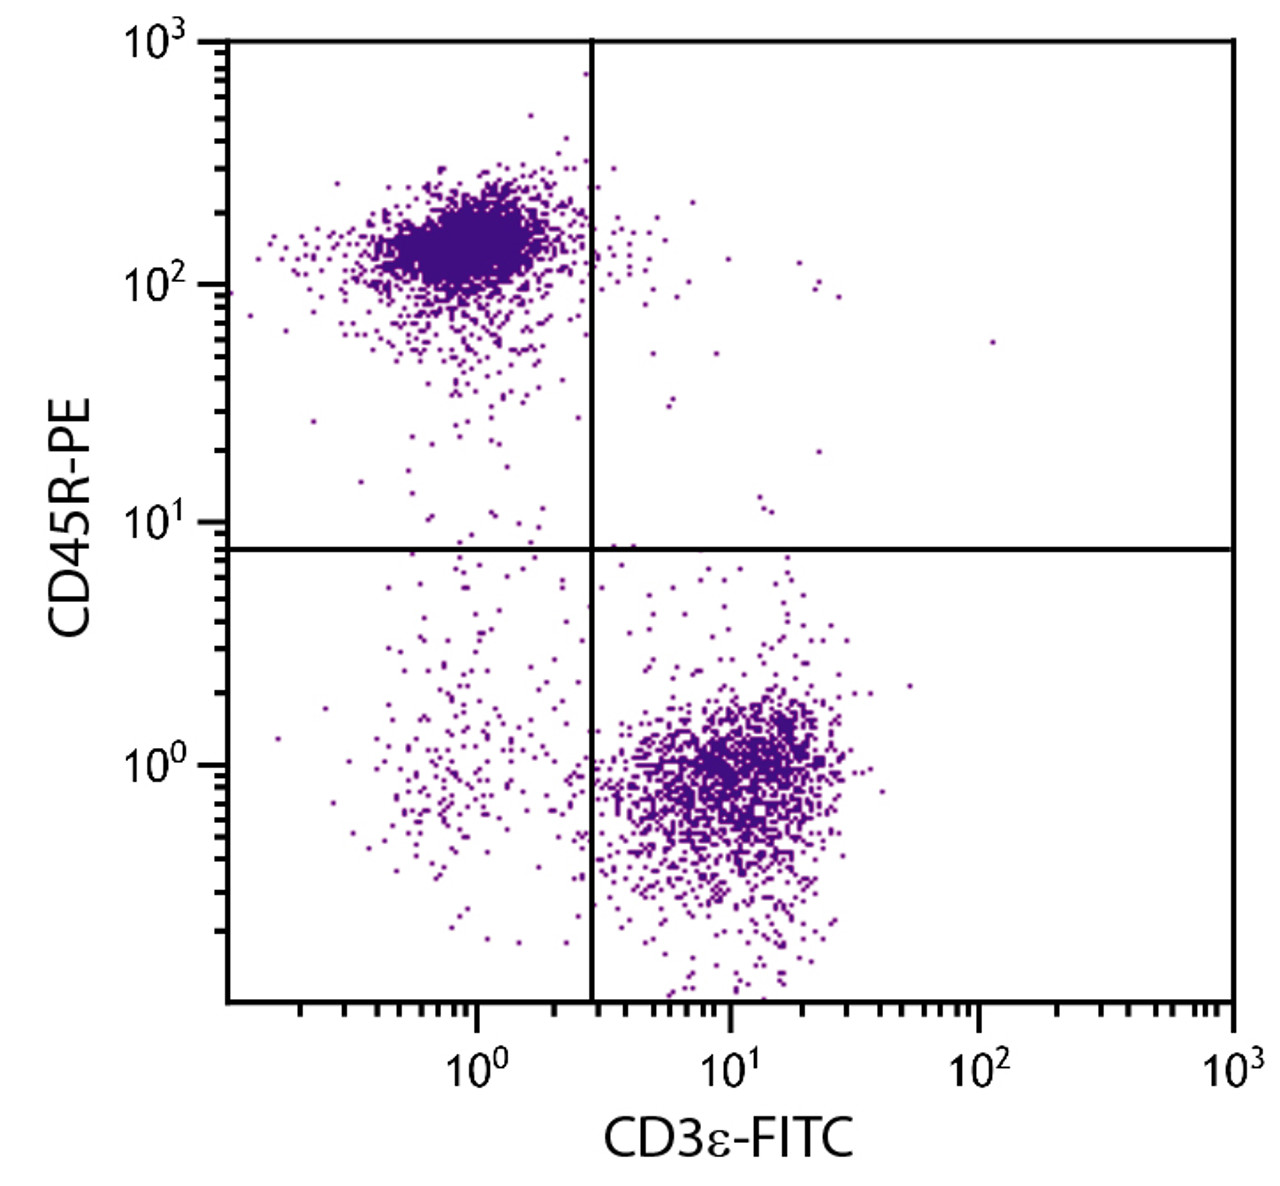 BALB/c mouse splenocytes were stained with Rat Anti-Mouse CD45R-PE (Cat. No. 98-788) and Rat Anti-Mouse CD3?-FITC .